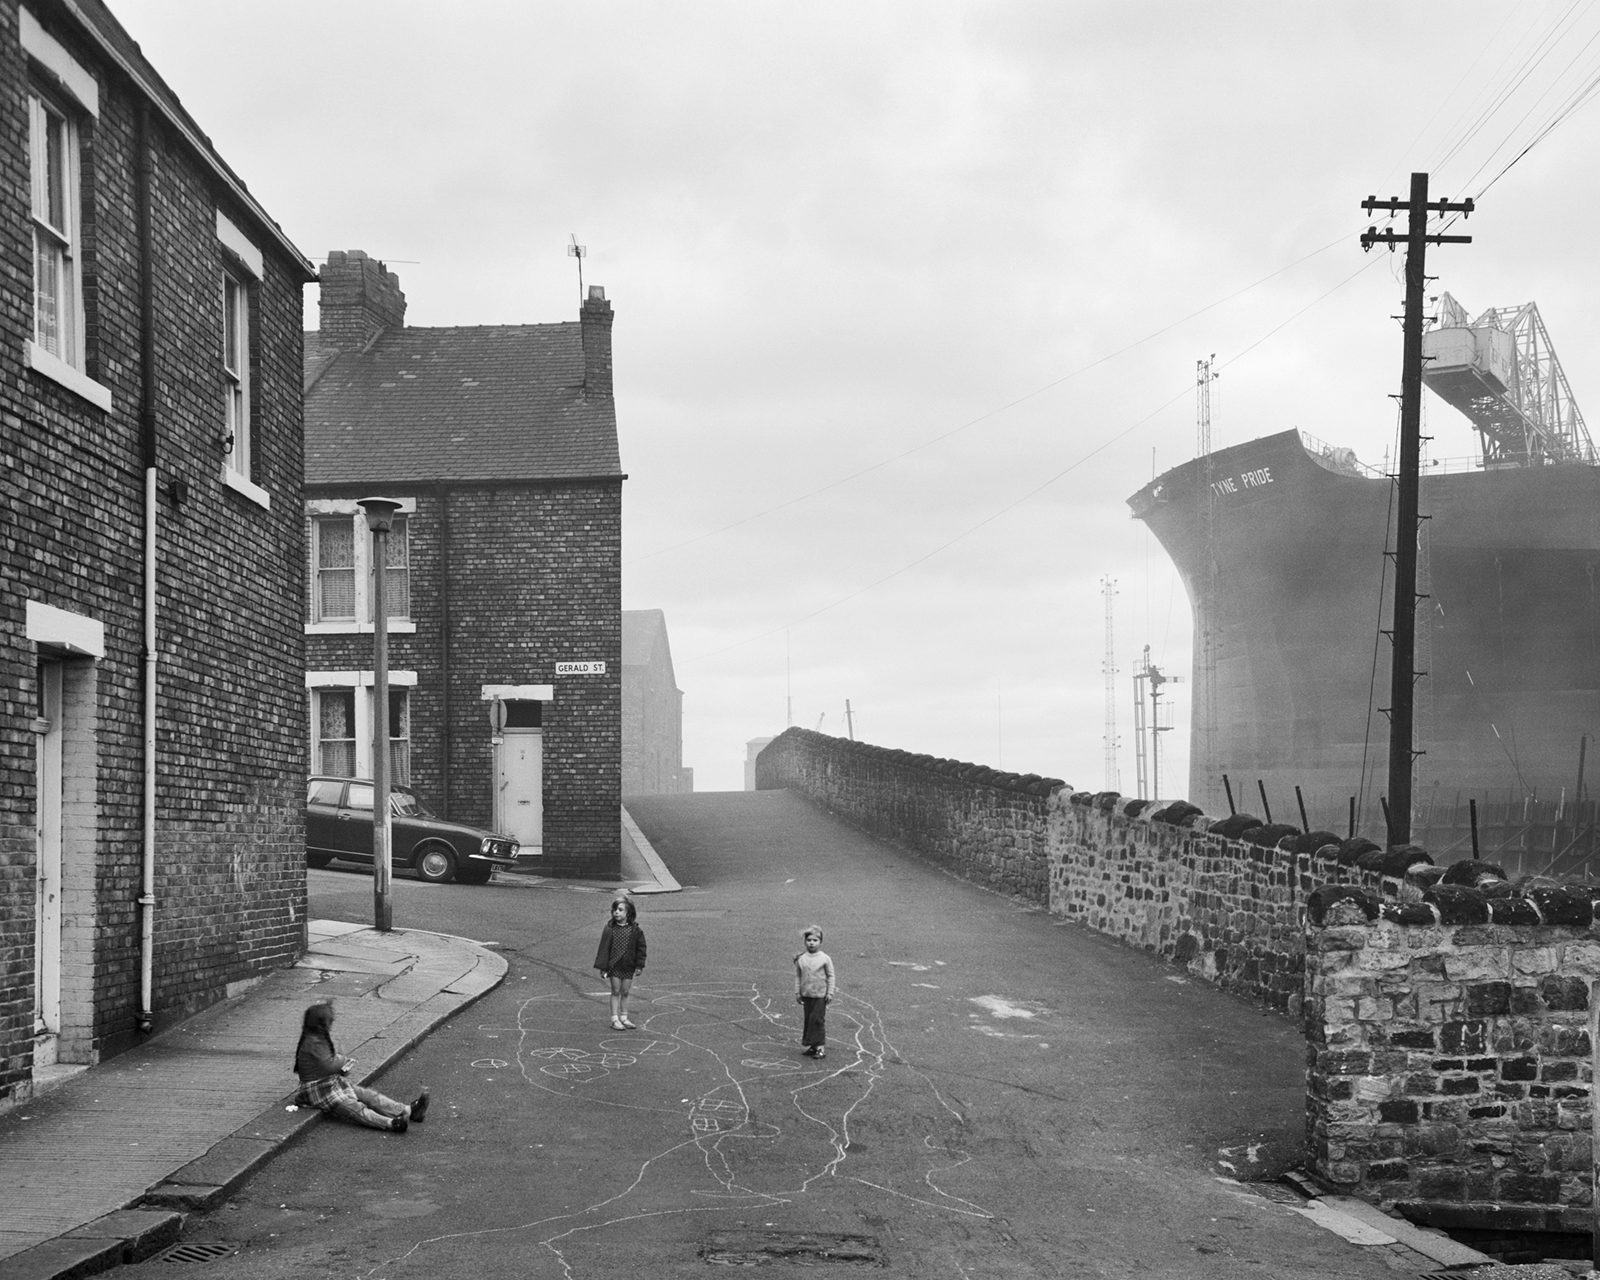 Black and white photograph of three children in the street with a ship docked next to it, which appears in the new Chris Killip exhibition